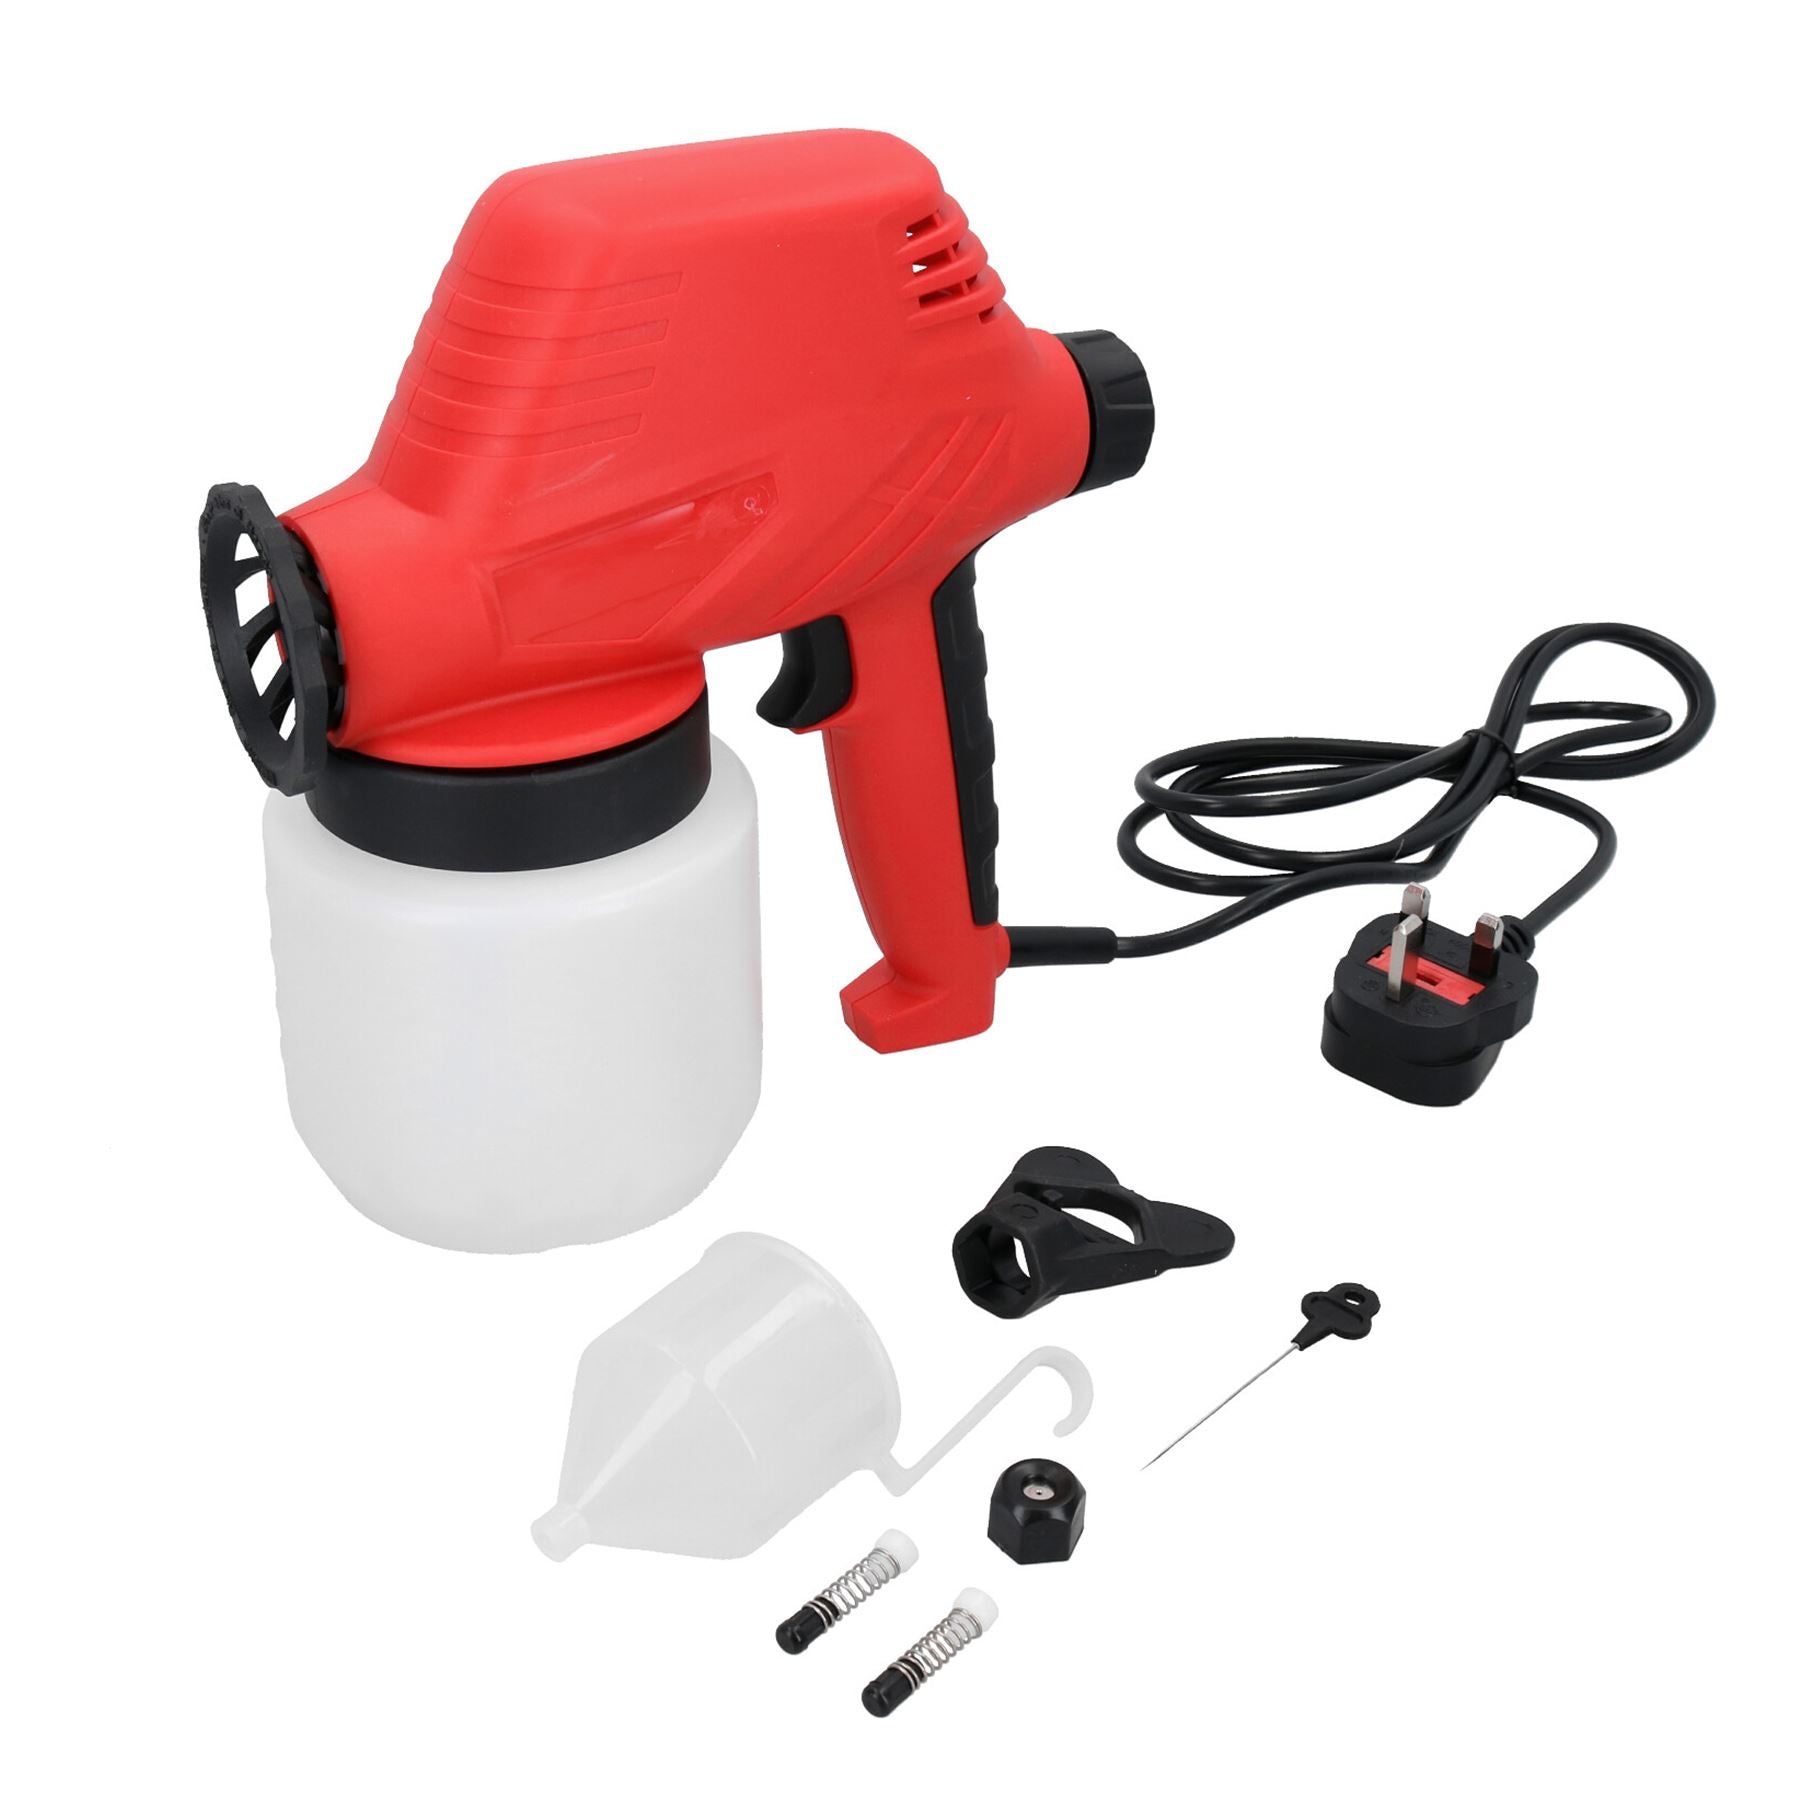 Electric Handheld Paint Sprayer Painting Spray Gun for Fences Sheds 800ml Cup